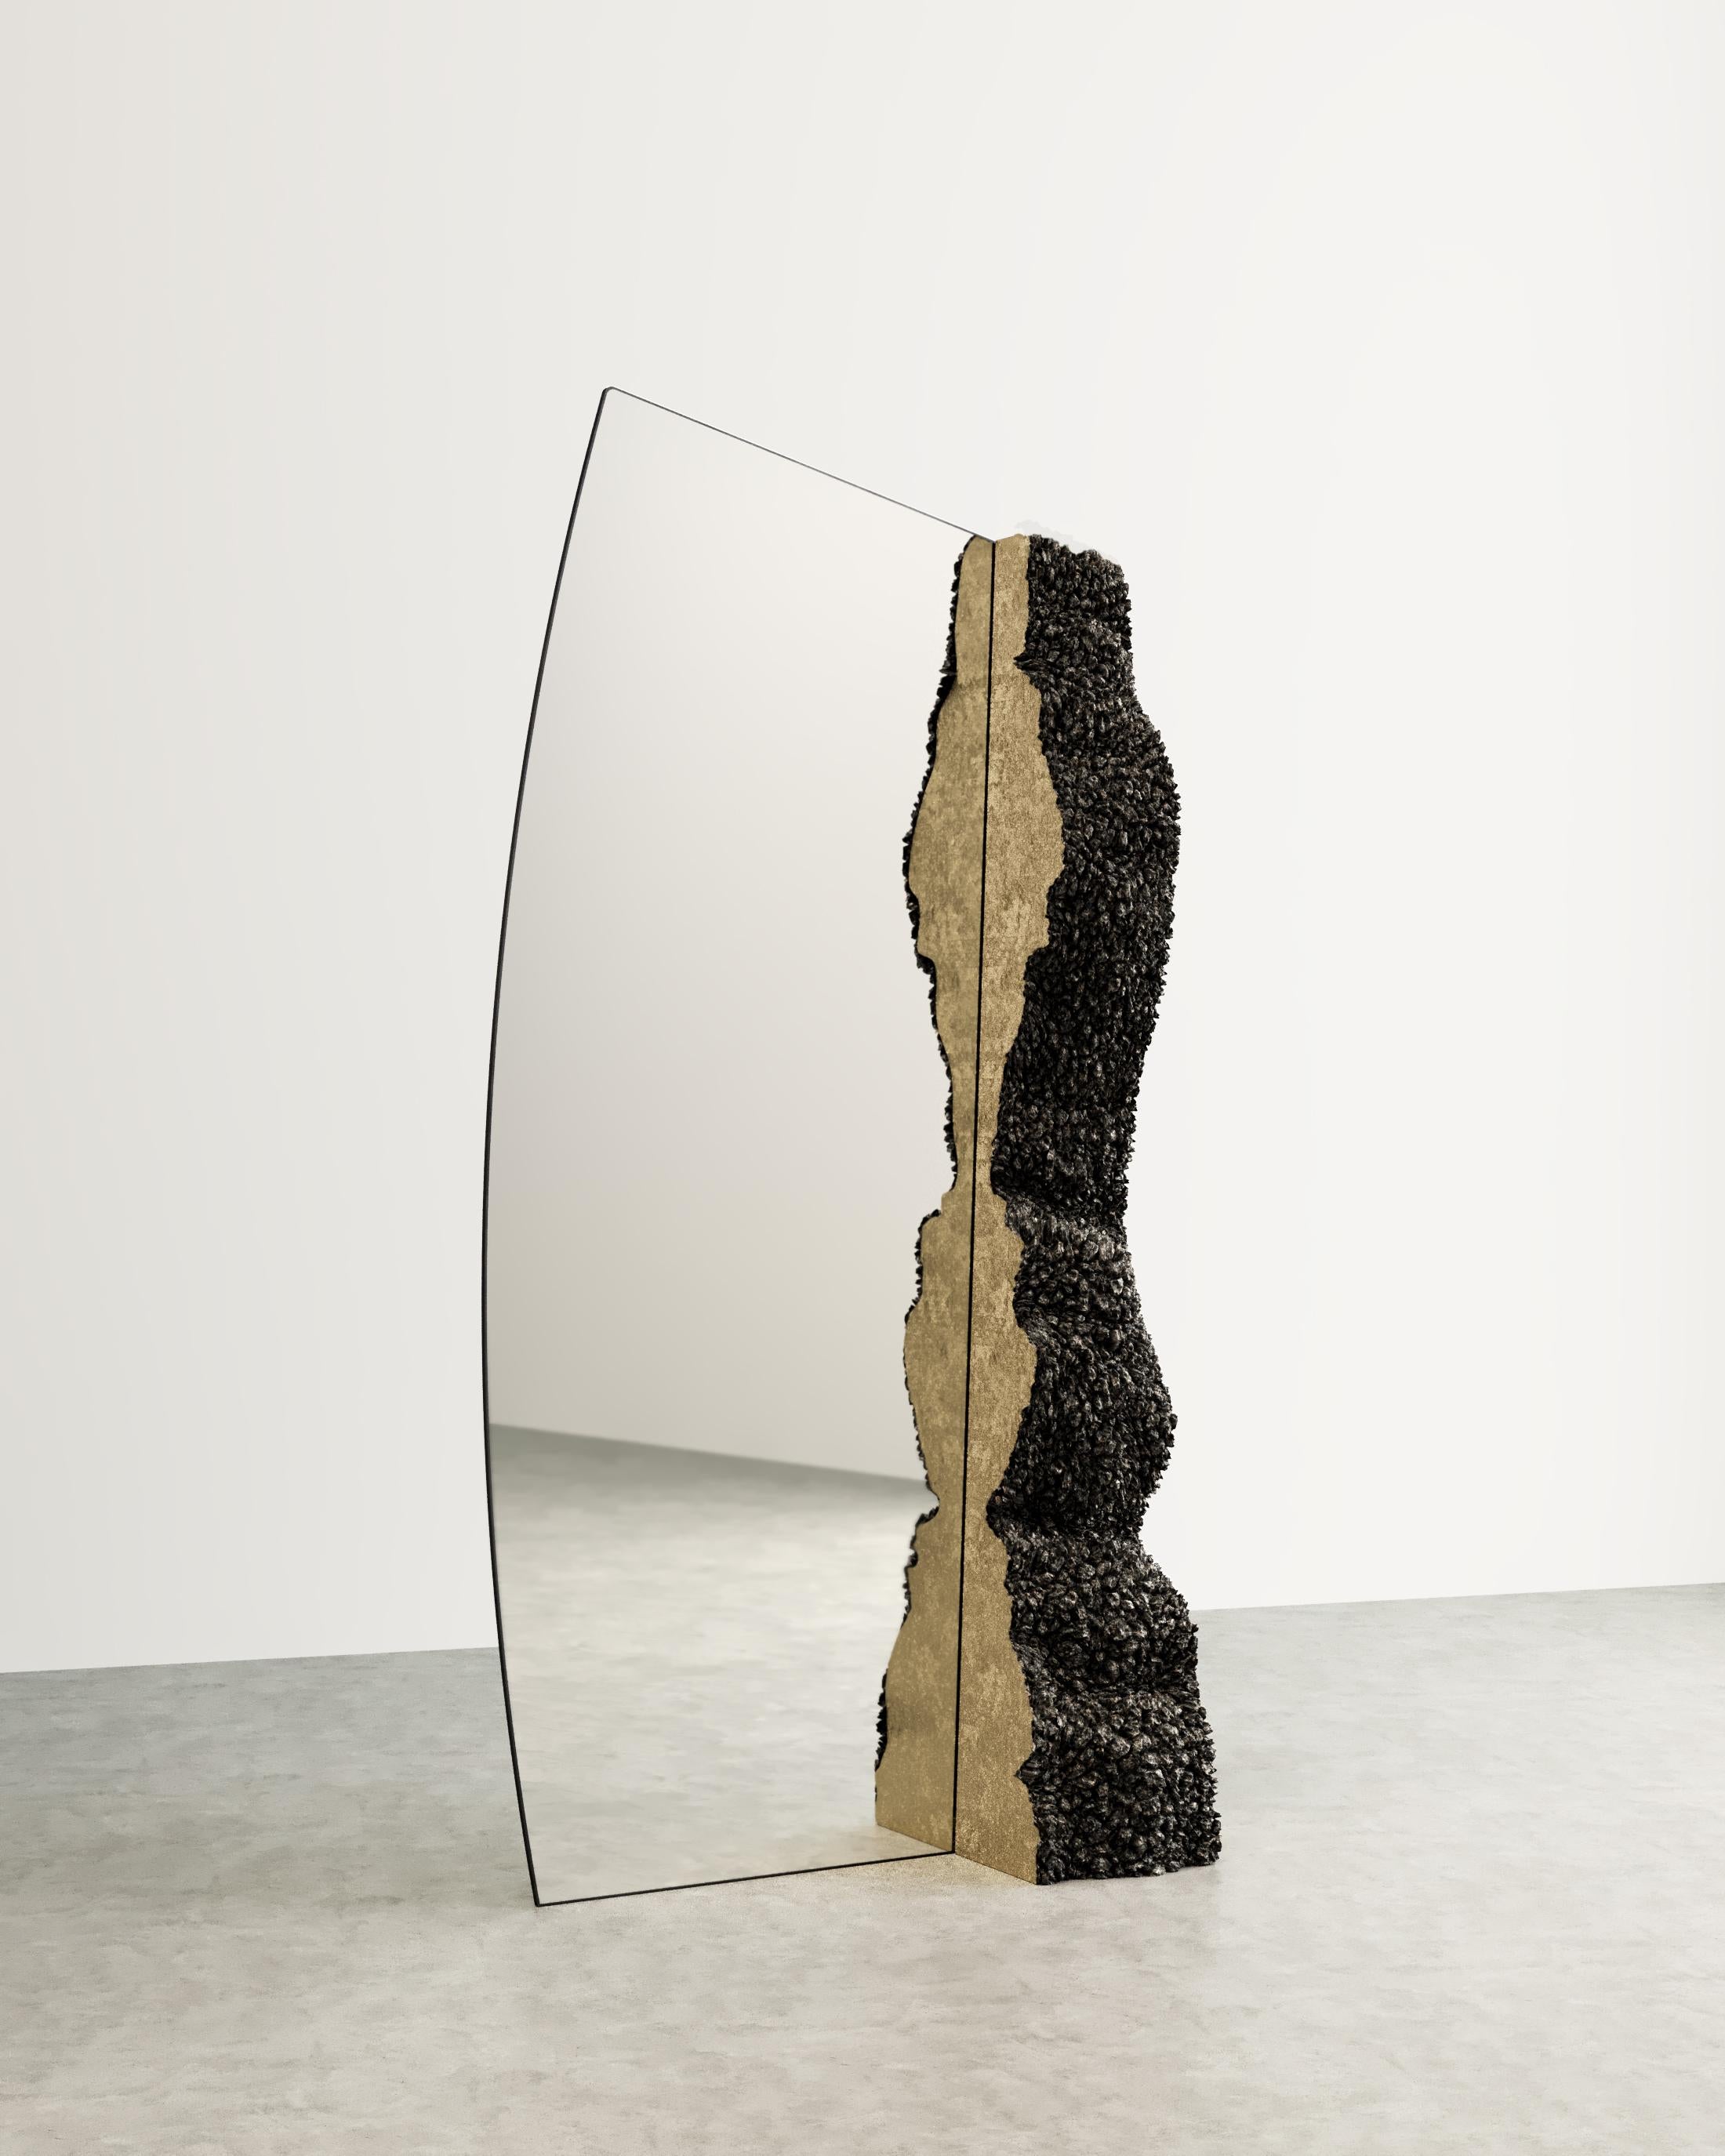 FL Mirror by Tipstudio
Exclusively sold by Galerie Philia.
Dimensions: W 94 x D 25 x H 190 (dimensions may vary)
Materials: Mirror, Bronze, other

Tipstudio, Imma Matera and Tommaso Lucarini, has chosen to focus on metals byproduct aims to enhancing